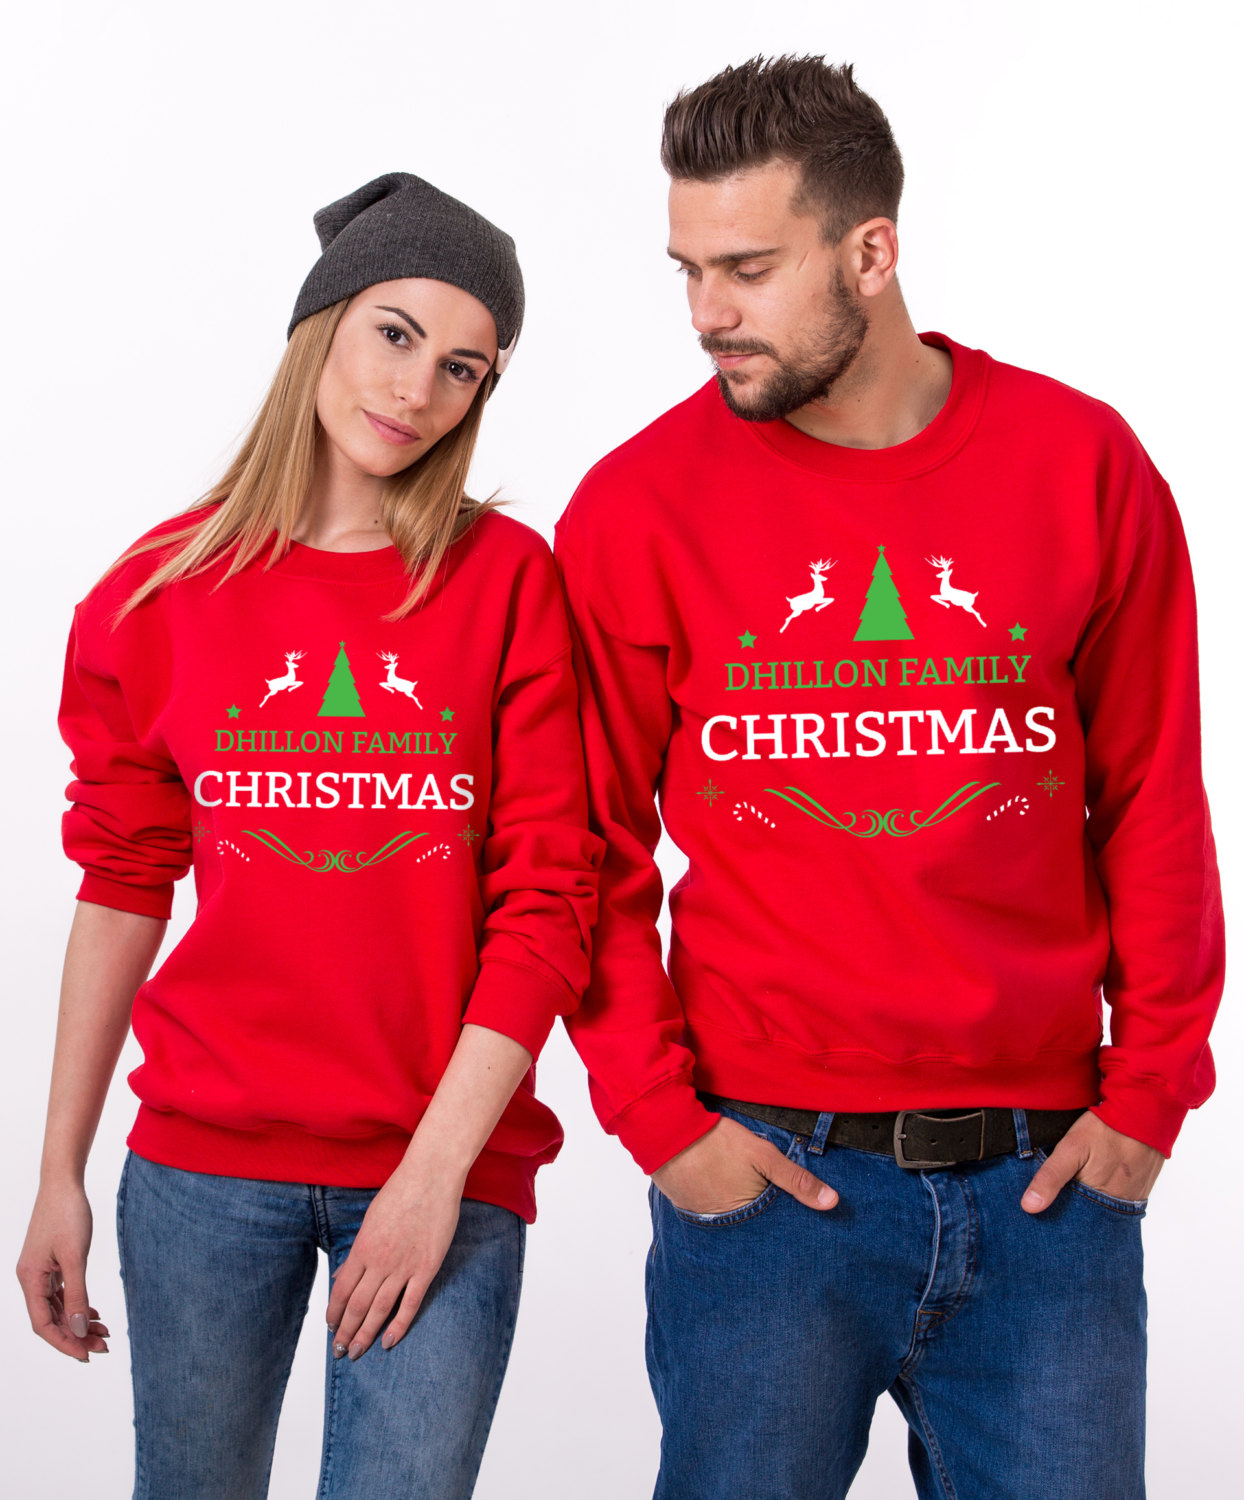 CUSTOM Name Matching Family Christmas Sweatshirts - Awesome Matching Shirts  for Couples, Families and Friends by Epic Tees